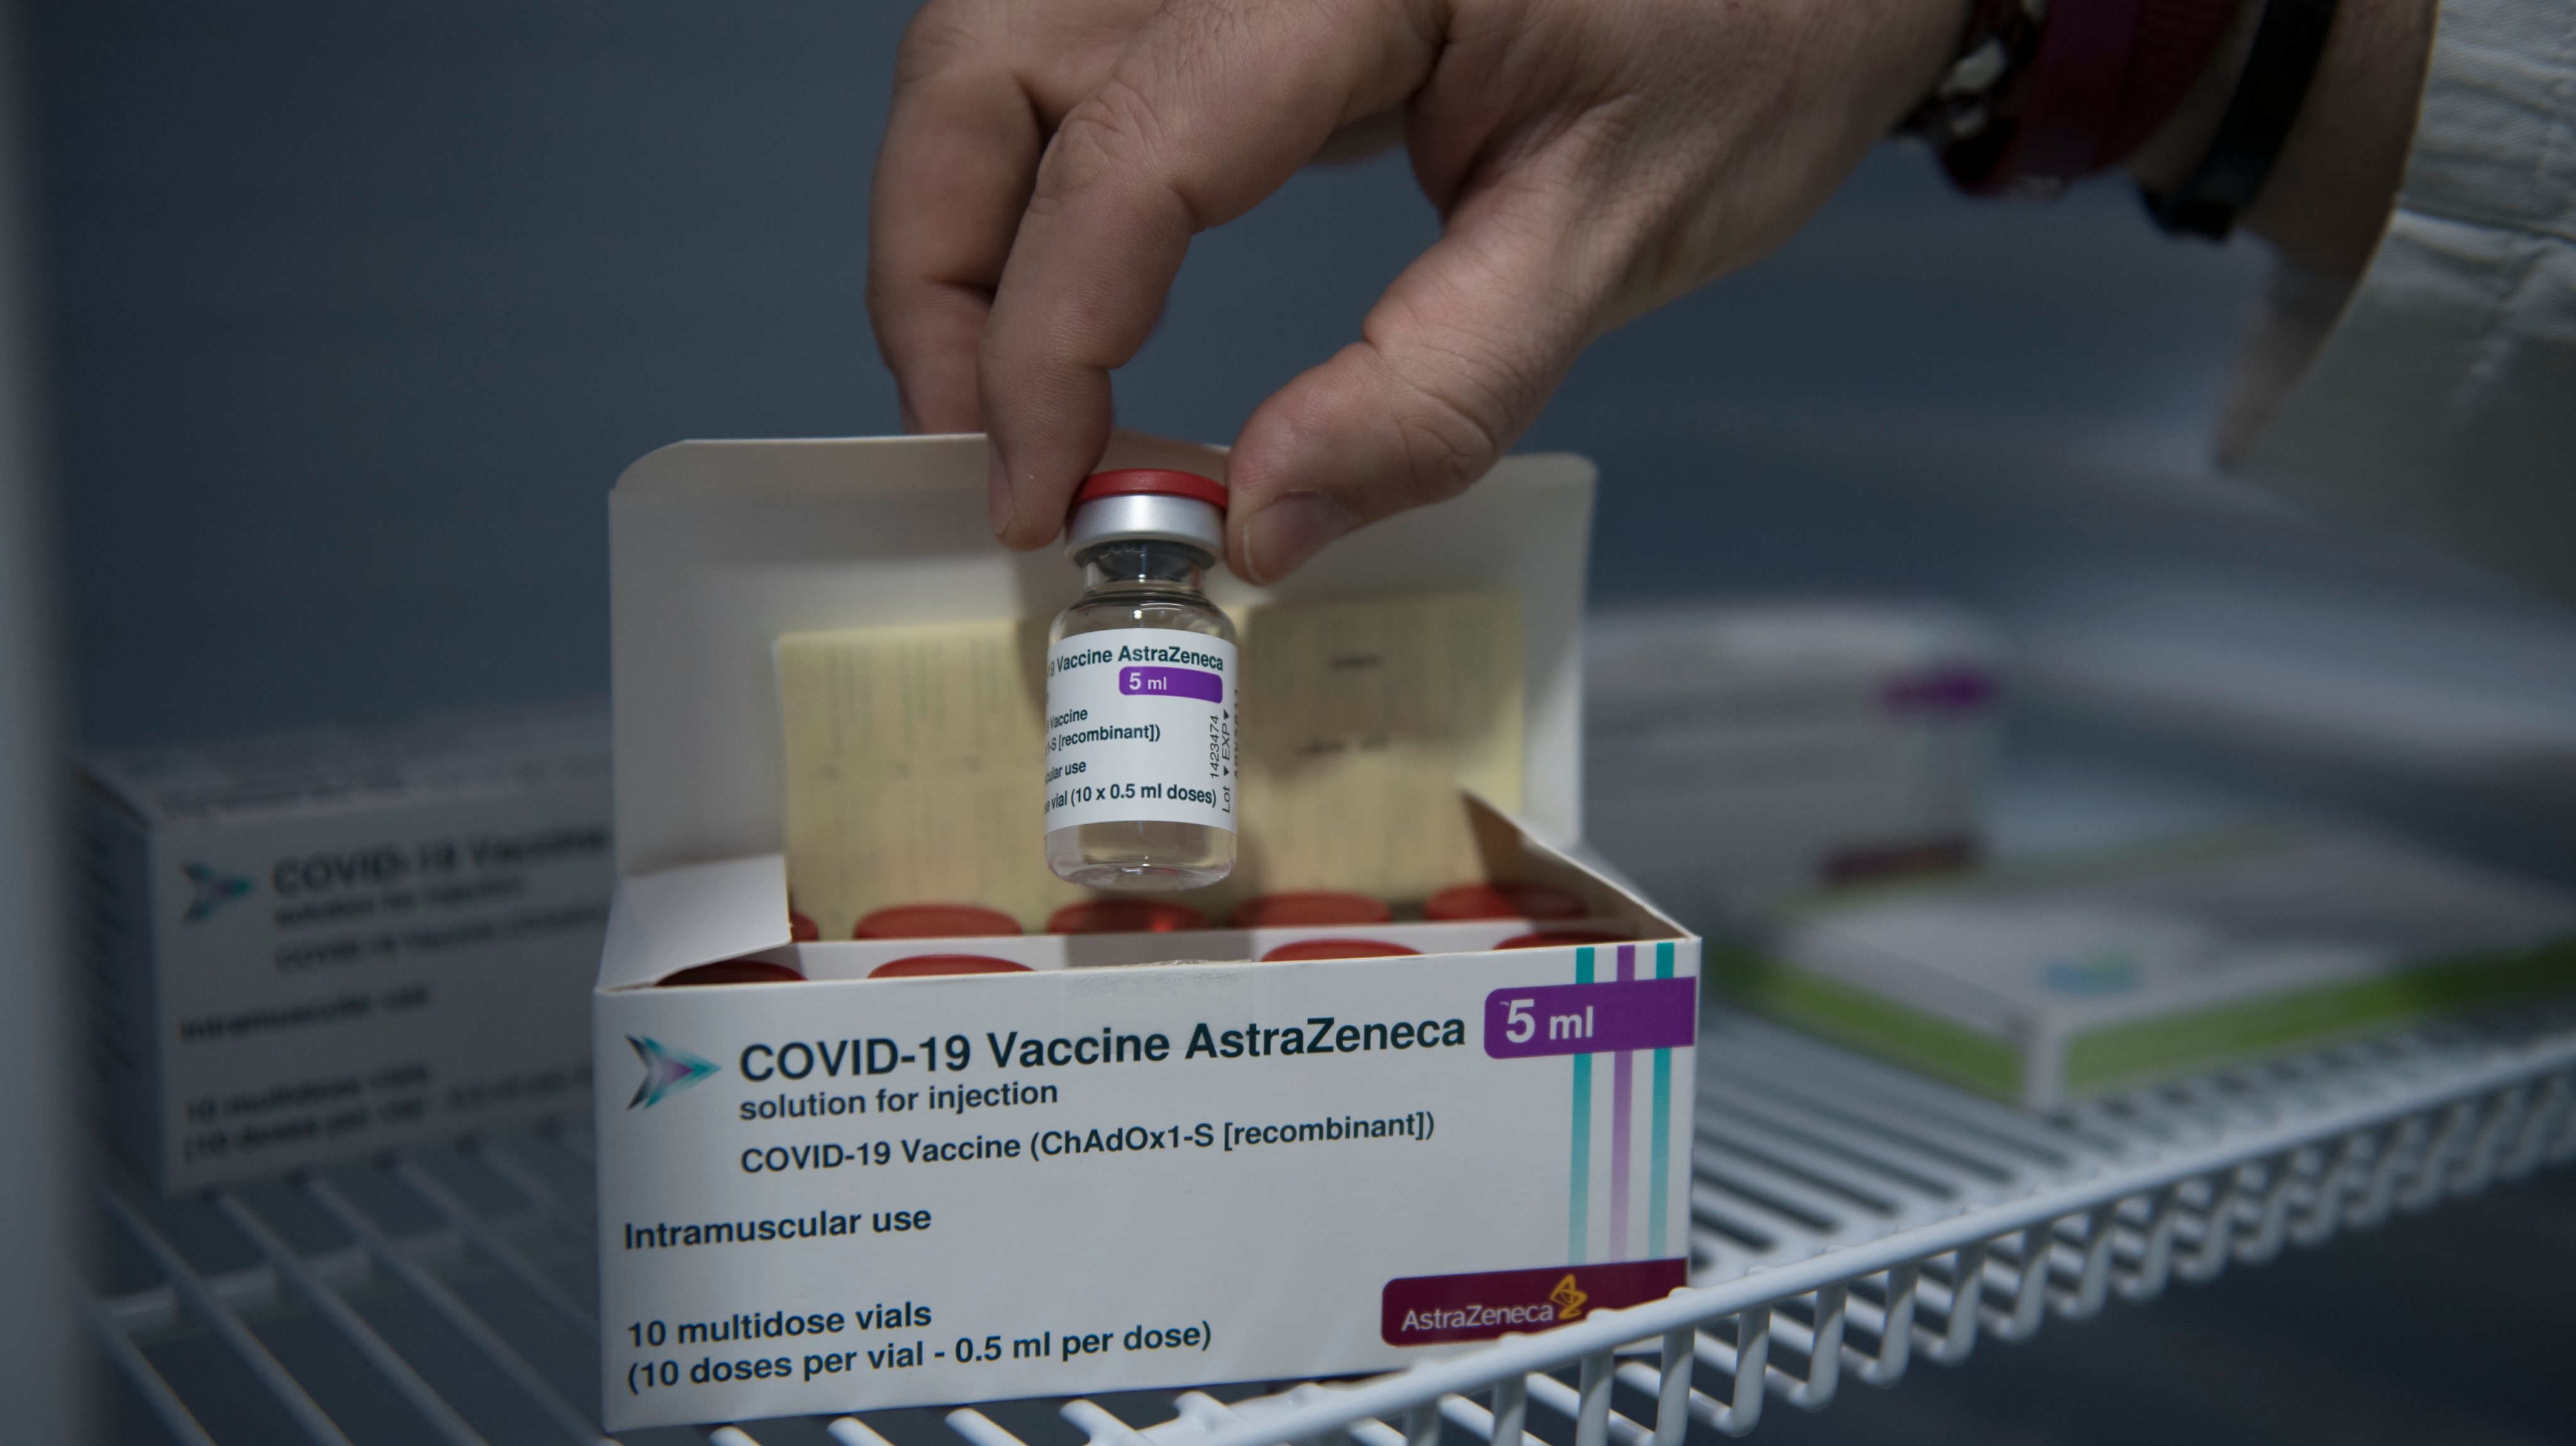 Covid-19 Vaccinations Take Place At Turin University Sports Center